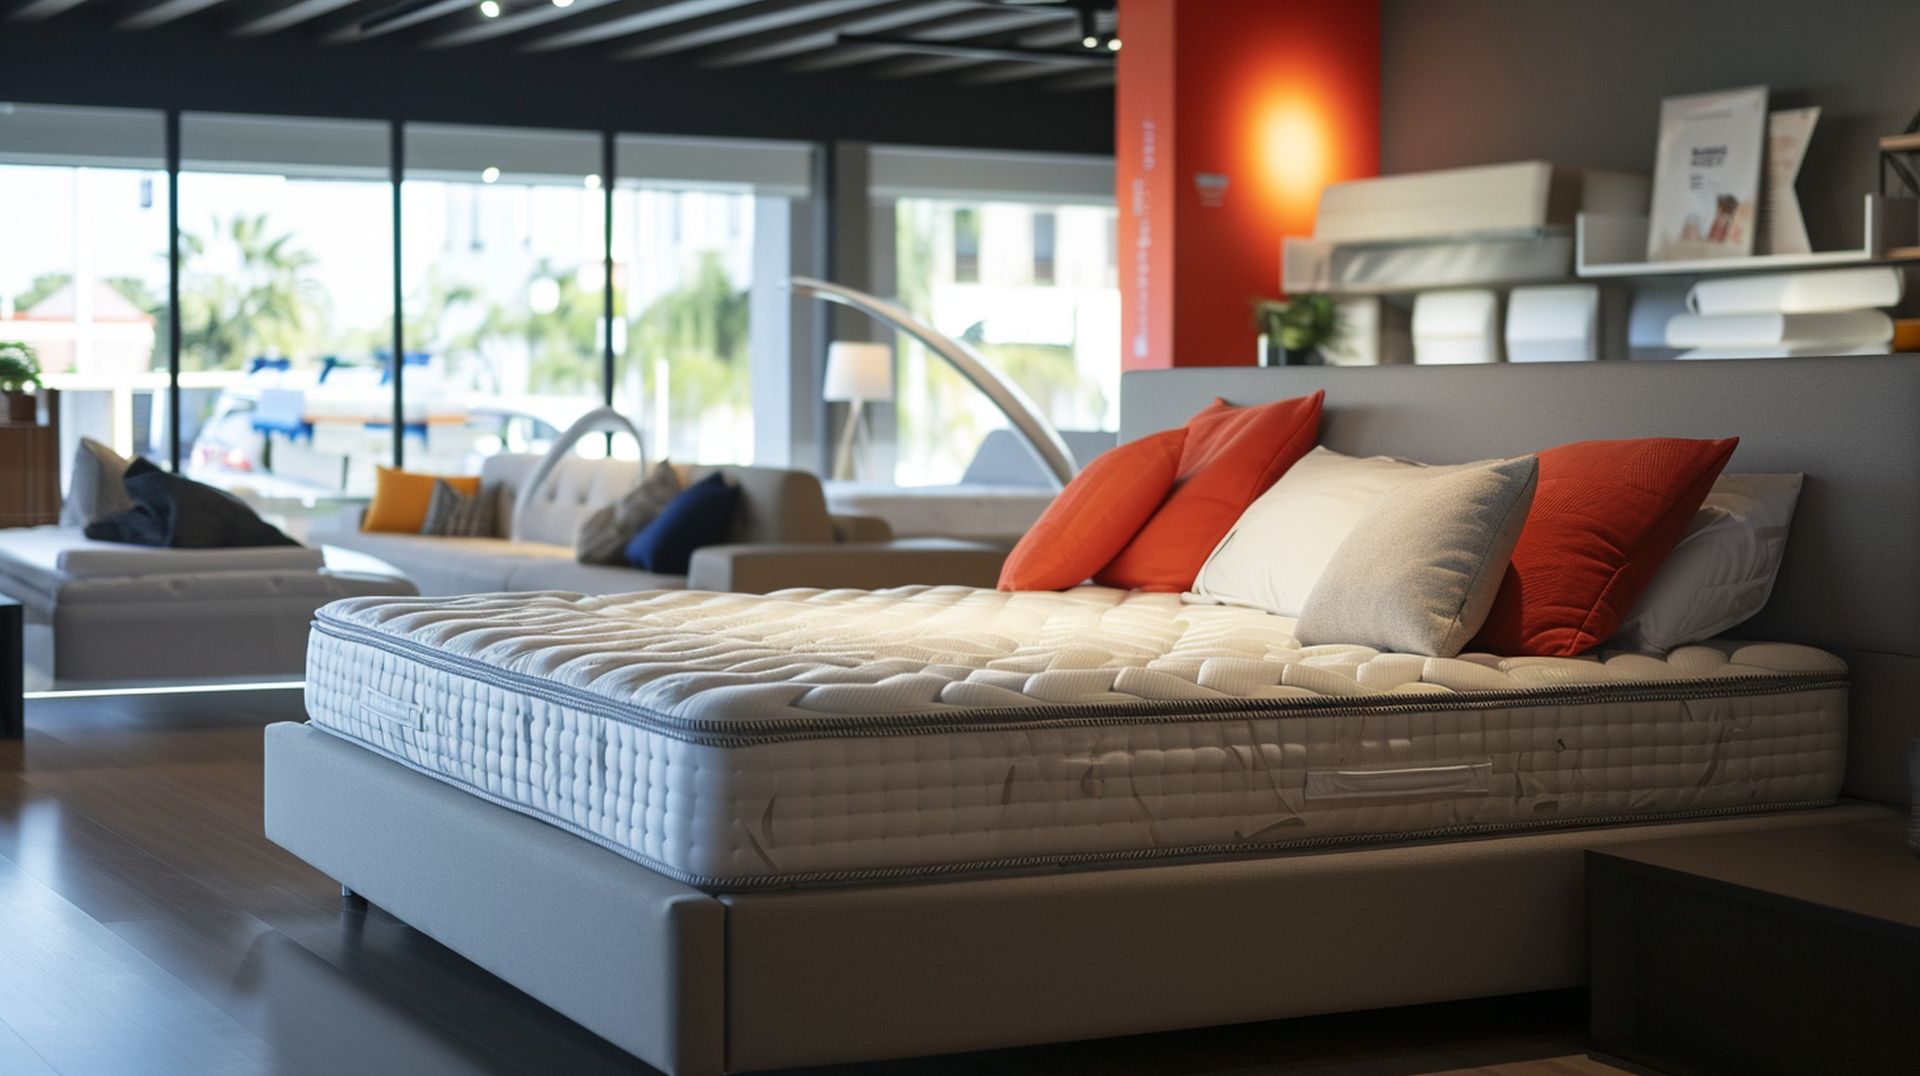 Local Rowland Heights mattress stores have the best prices, sales, and deals if you're looking for a new mattress in Rowland Heights